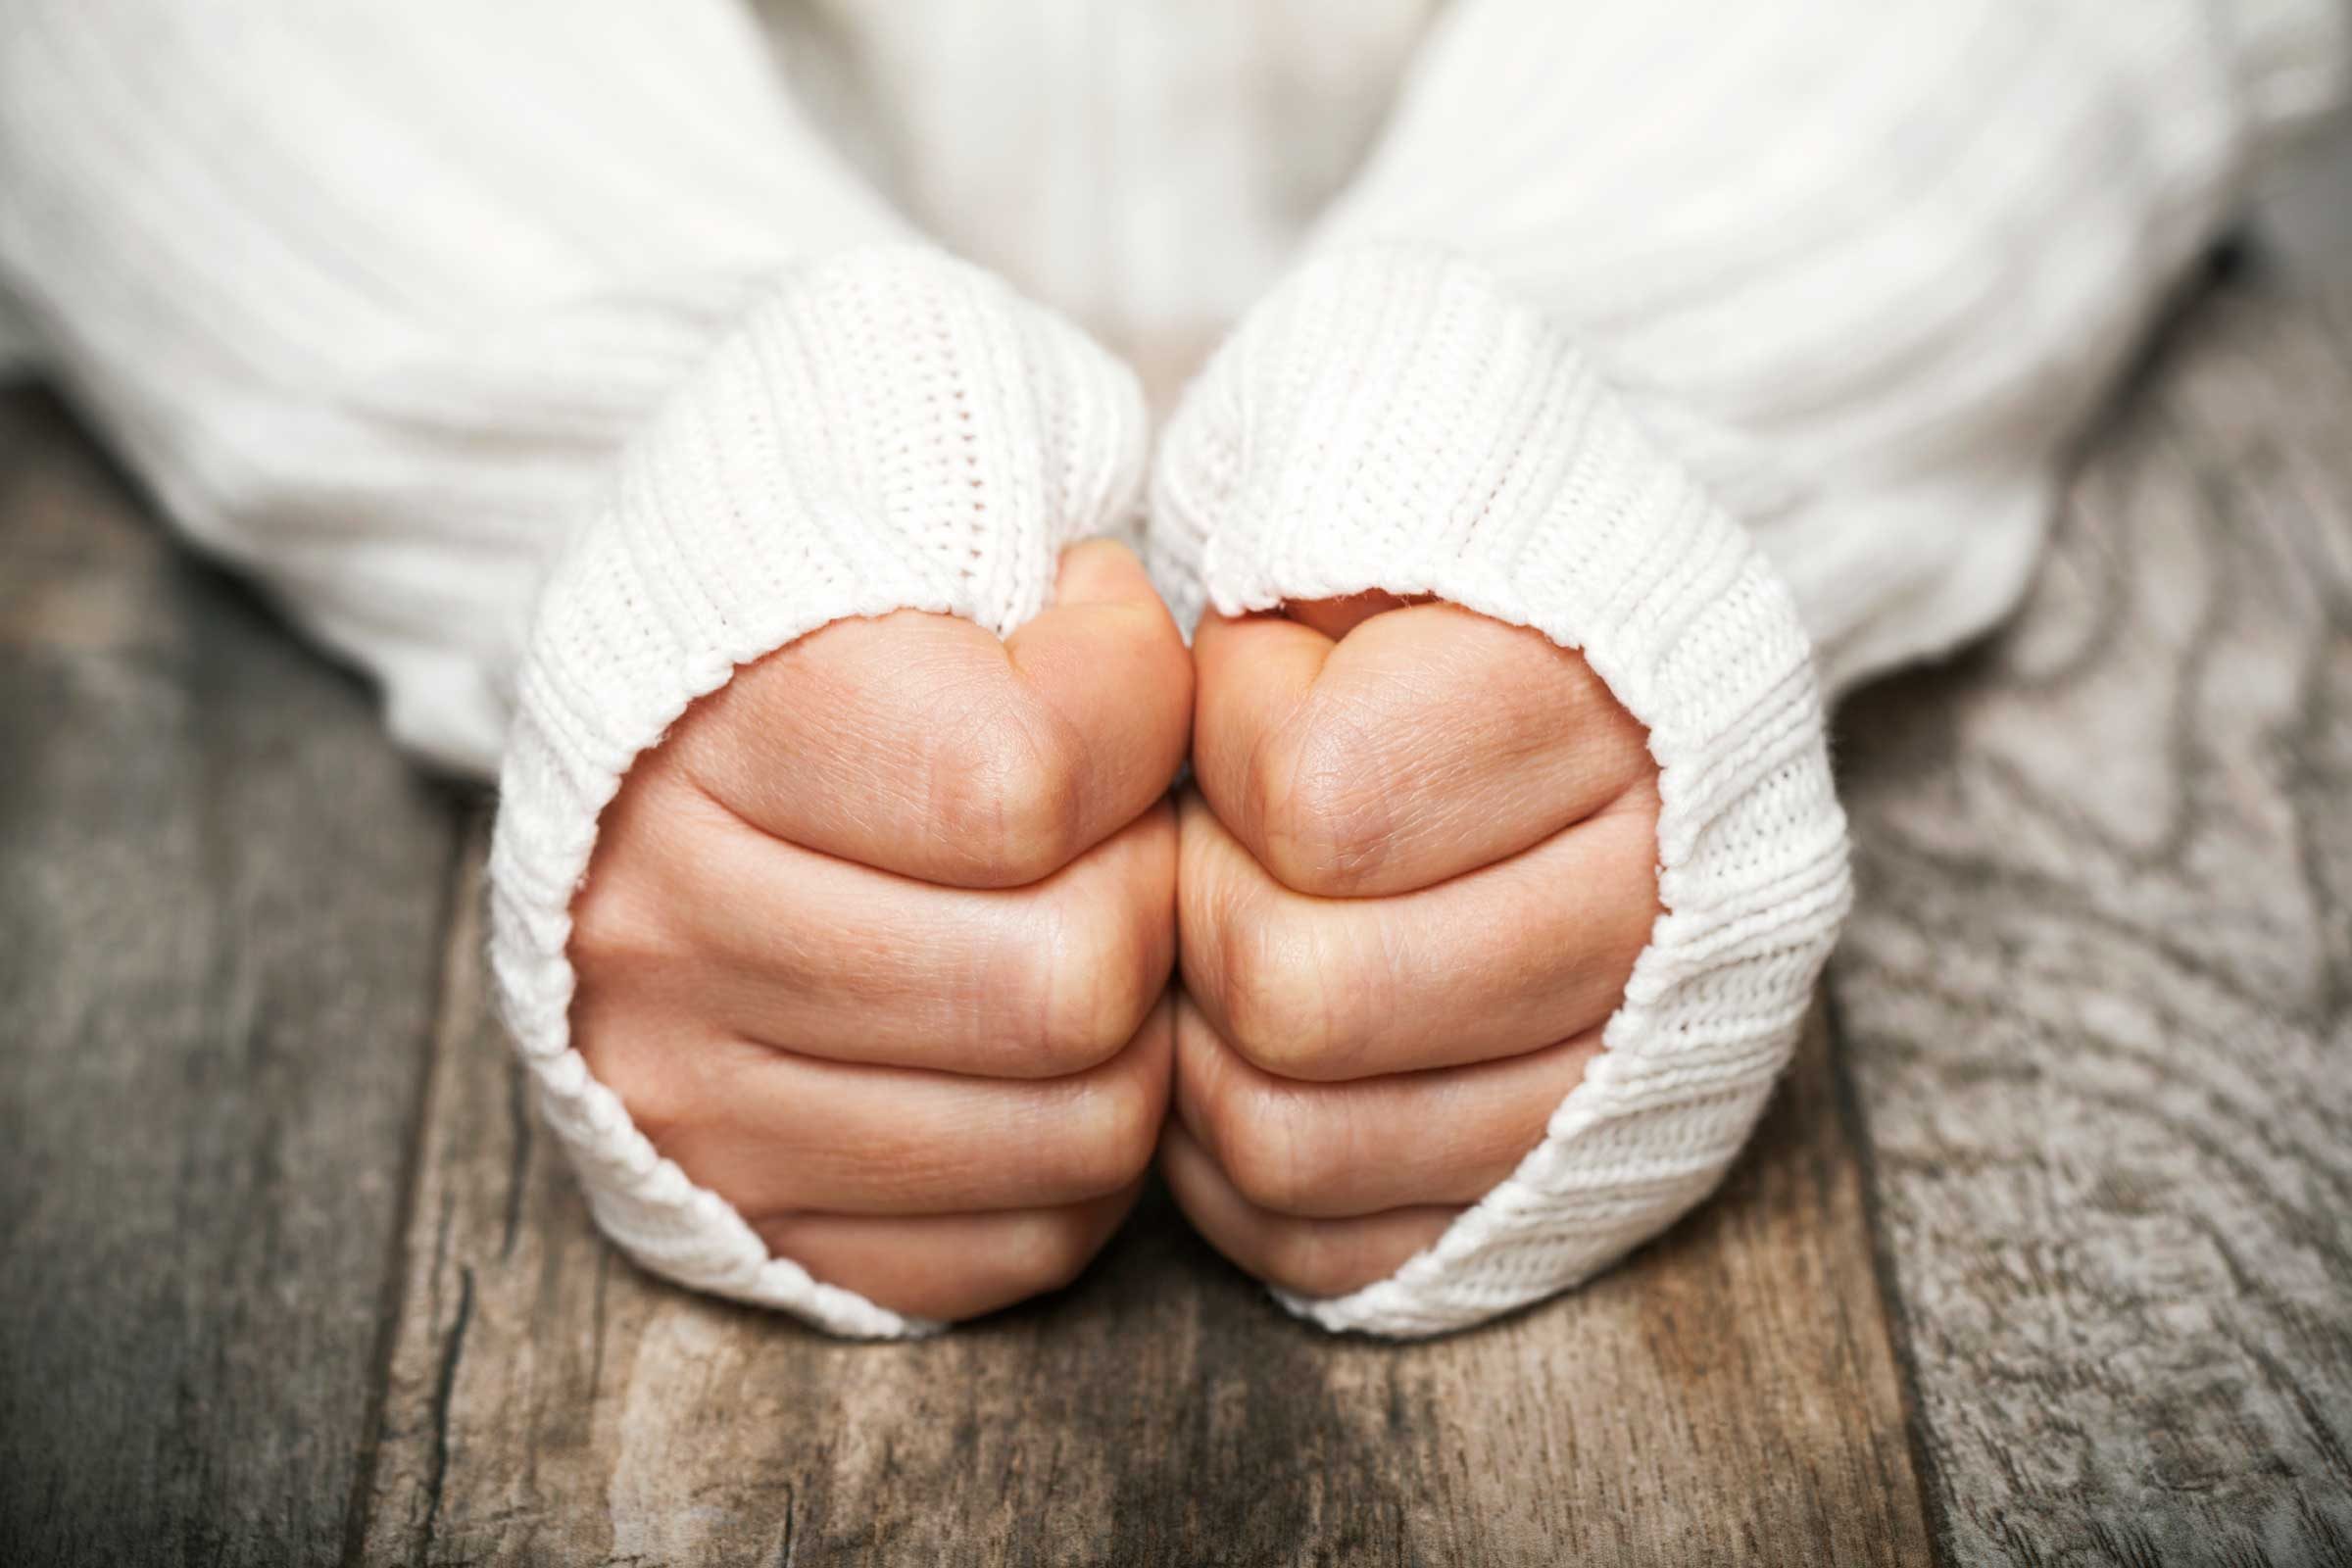 12 Medical Reasons You're Always Cold